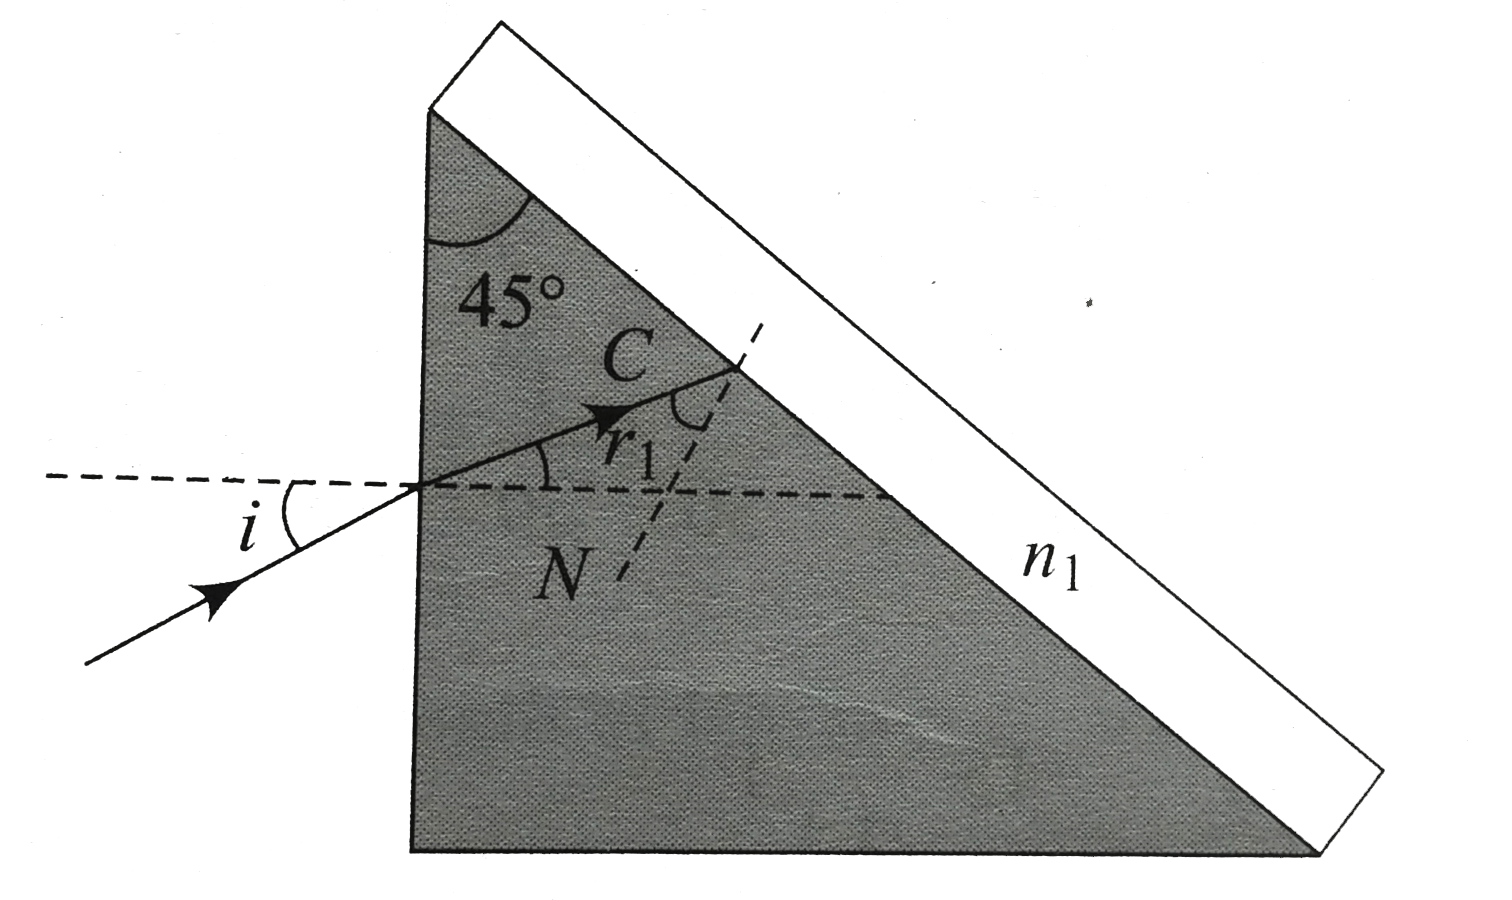 A right angles prism (45^(@),90^(@), 45^(@))  of refractive index n has a plate of refractive index (n(1)ltn) cemented to its diagonal face. The assembley is in  air. A ray is incident on AB.        a. Calculate the angle of incidence at AB for which the ray strikes the diagonal face at the critical angle.   b. Assuming n=1.351, calculate the angle of incidence at AB for which the refracted rey passes through the diagonal face undeviated.